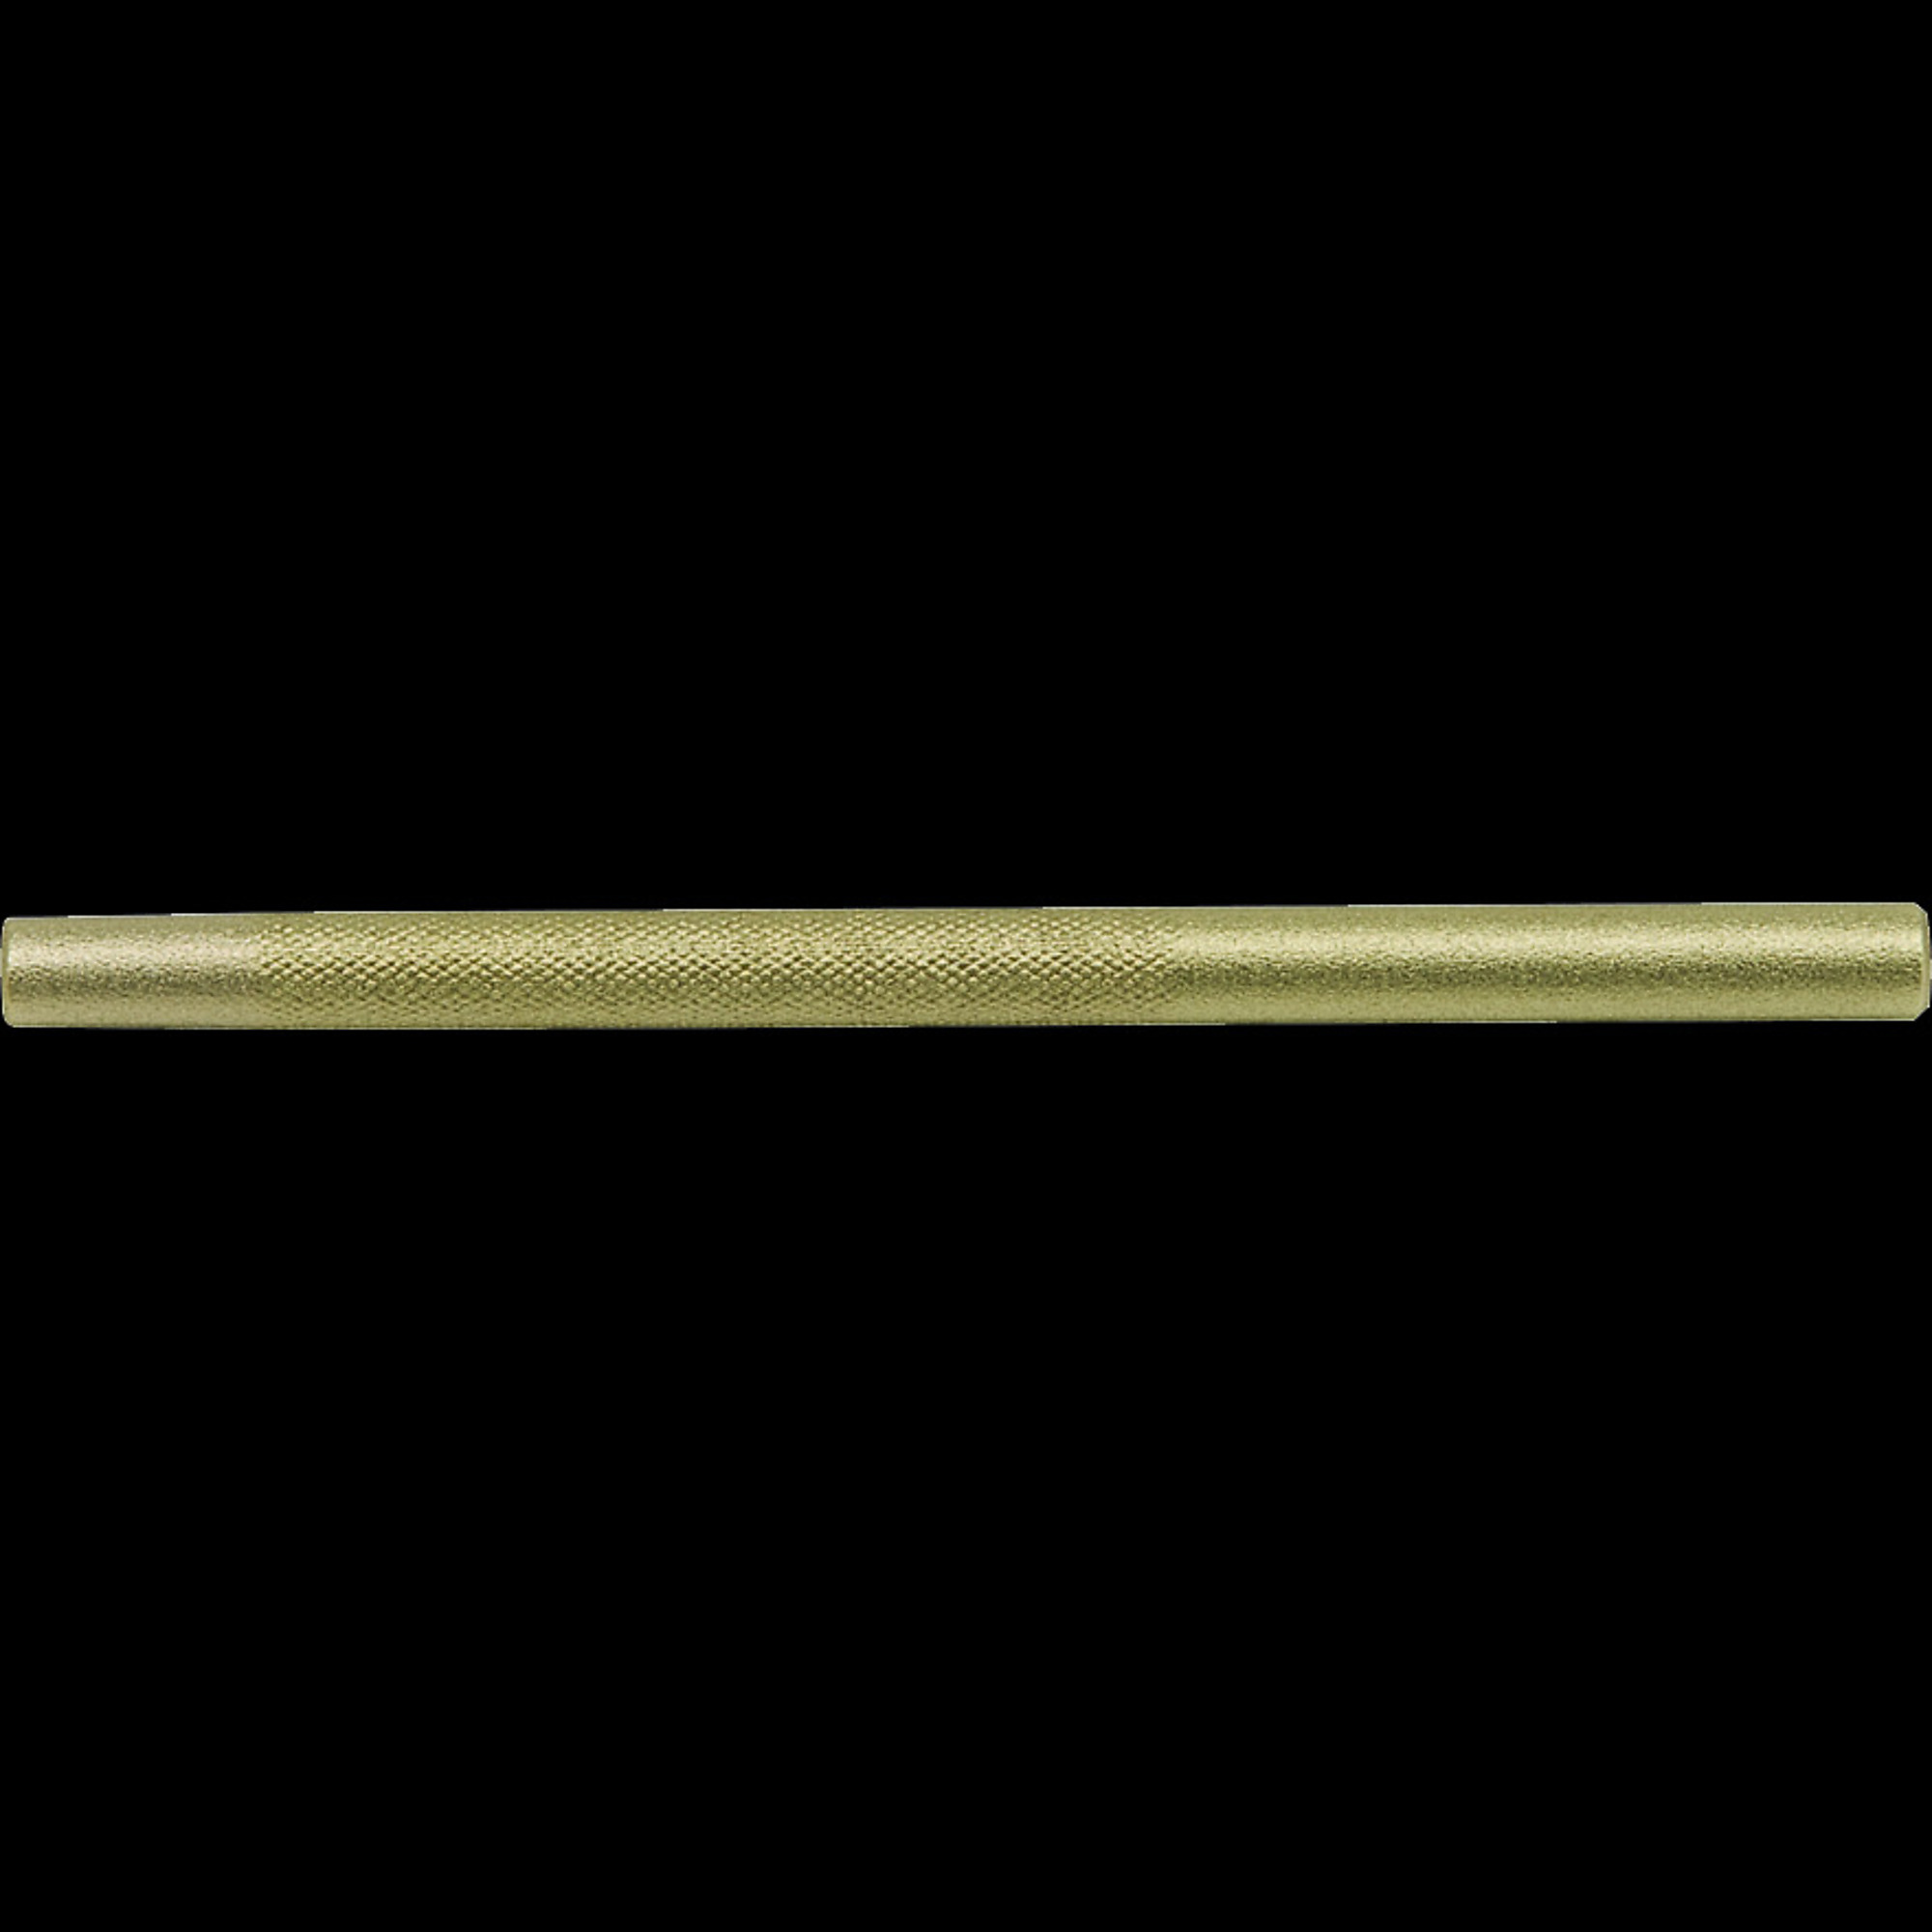 Stanley Proto, 3/8Inch Brass Drift Punch, Product Type Punch, Pieces (qty.) 1, Model J9638B